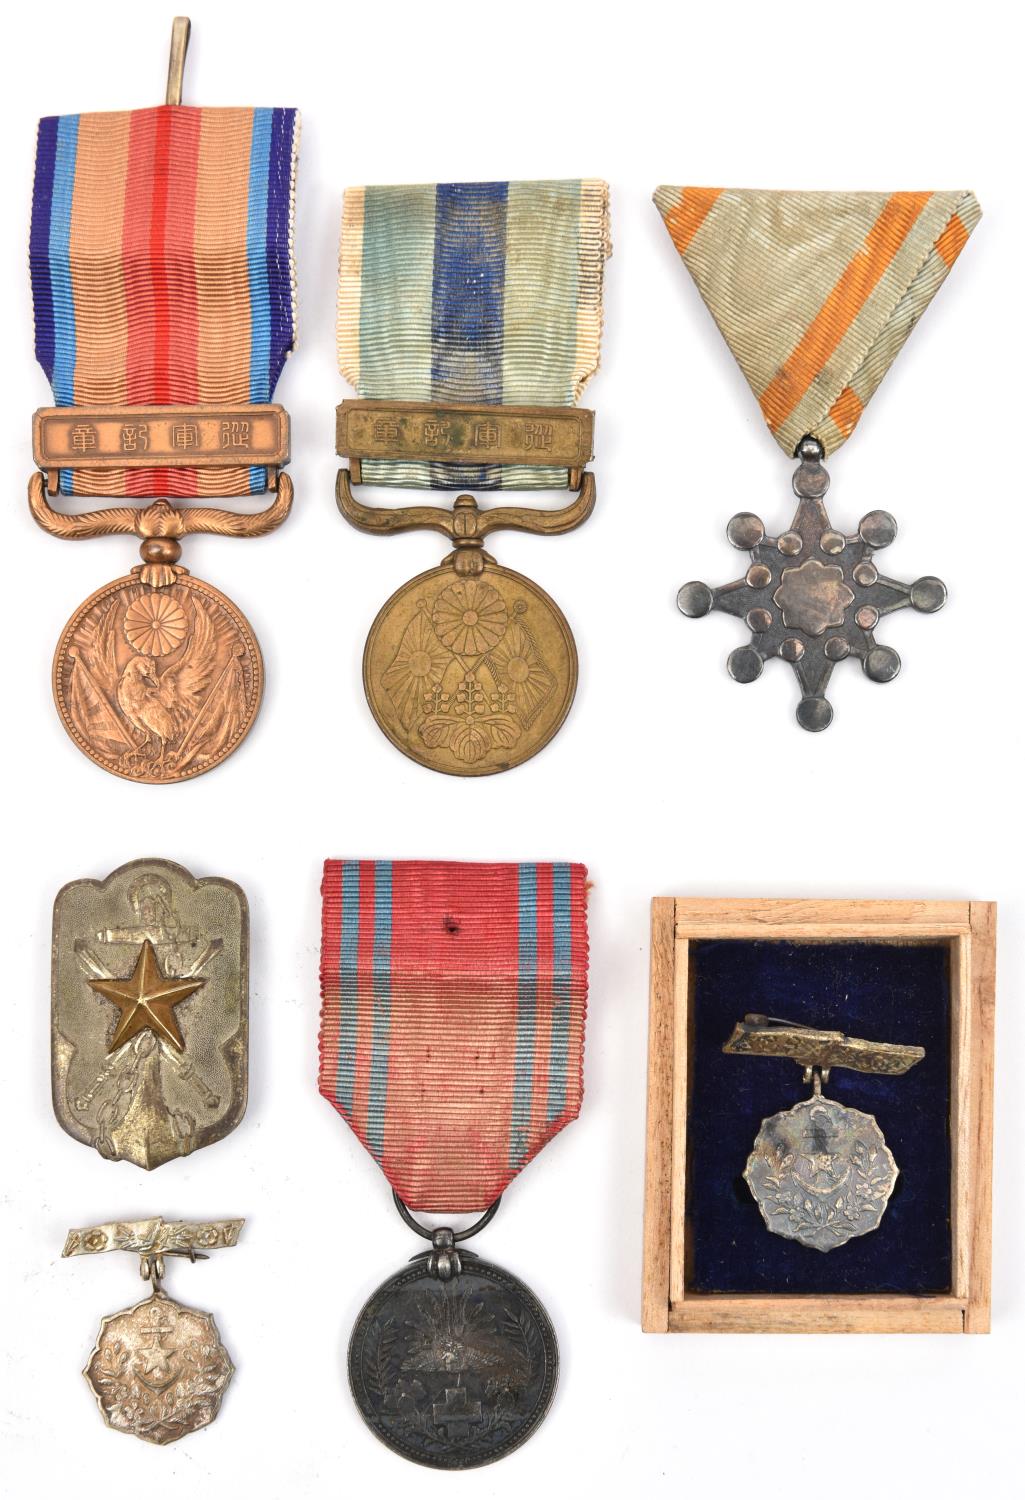 Japan: Order of the Sacred Treasure, 8th class badge in silver; Red Cross medal of Merit; Russo